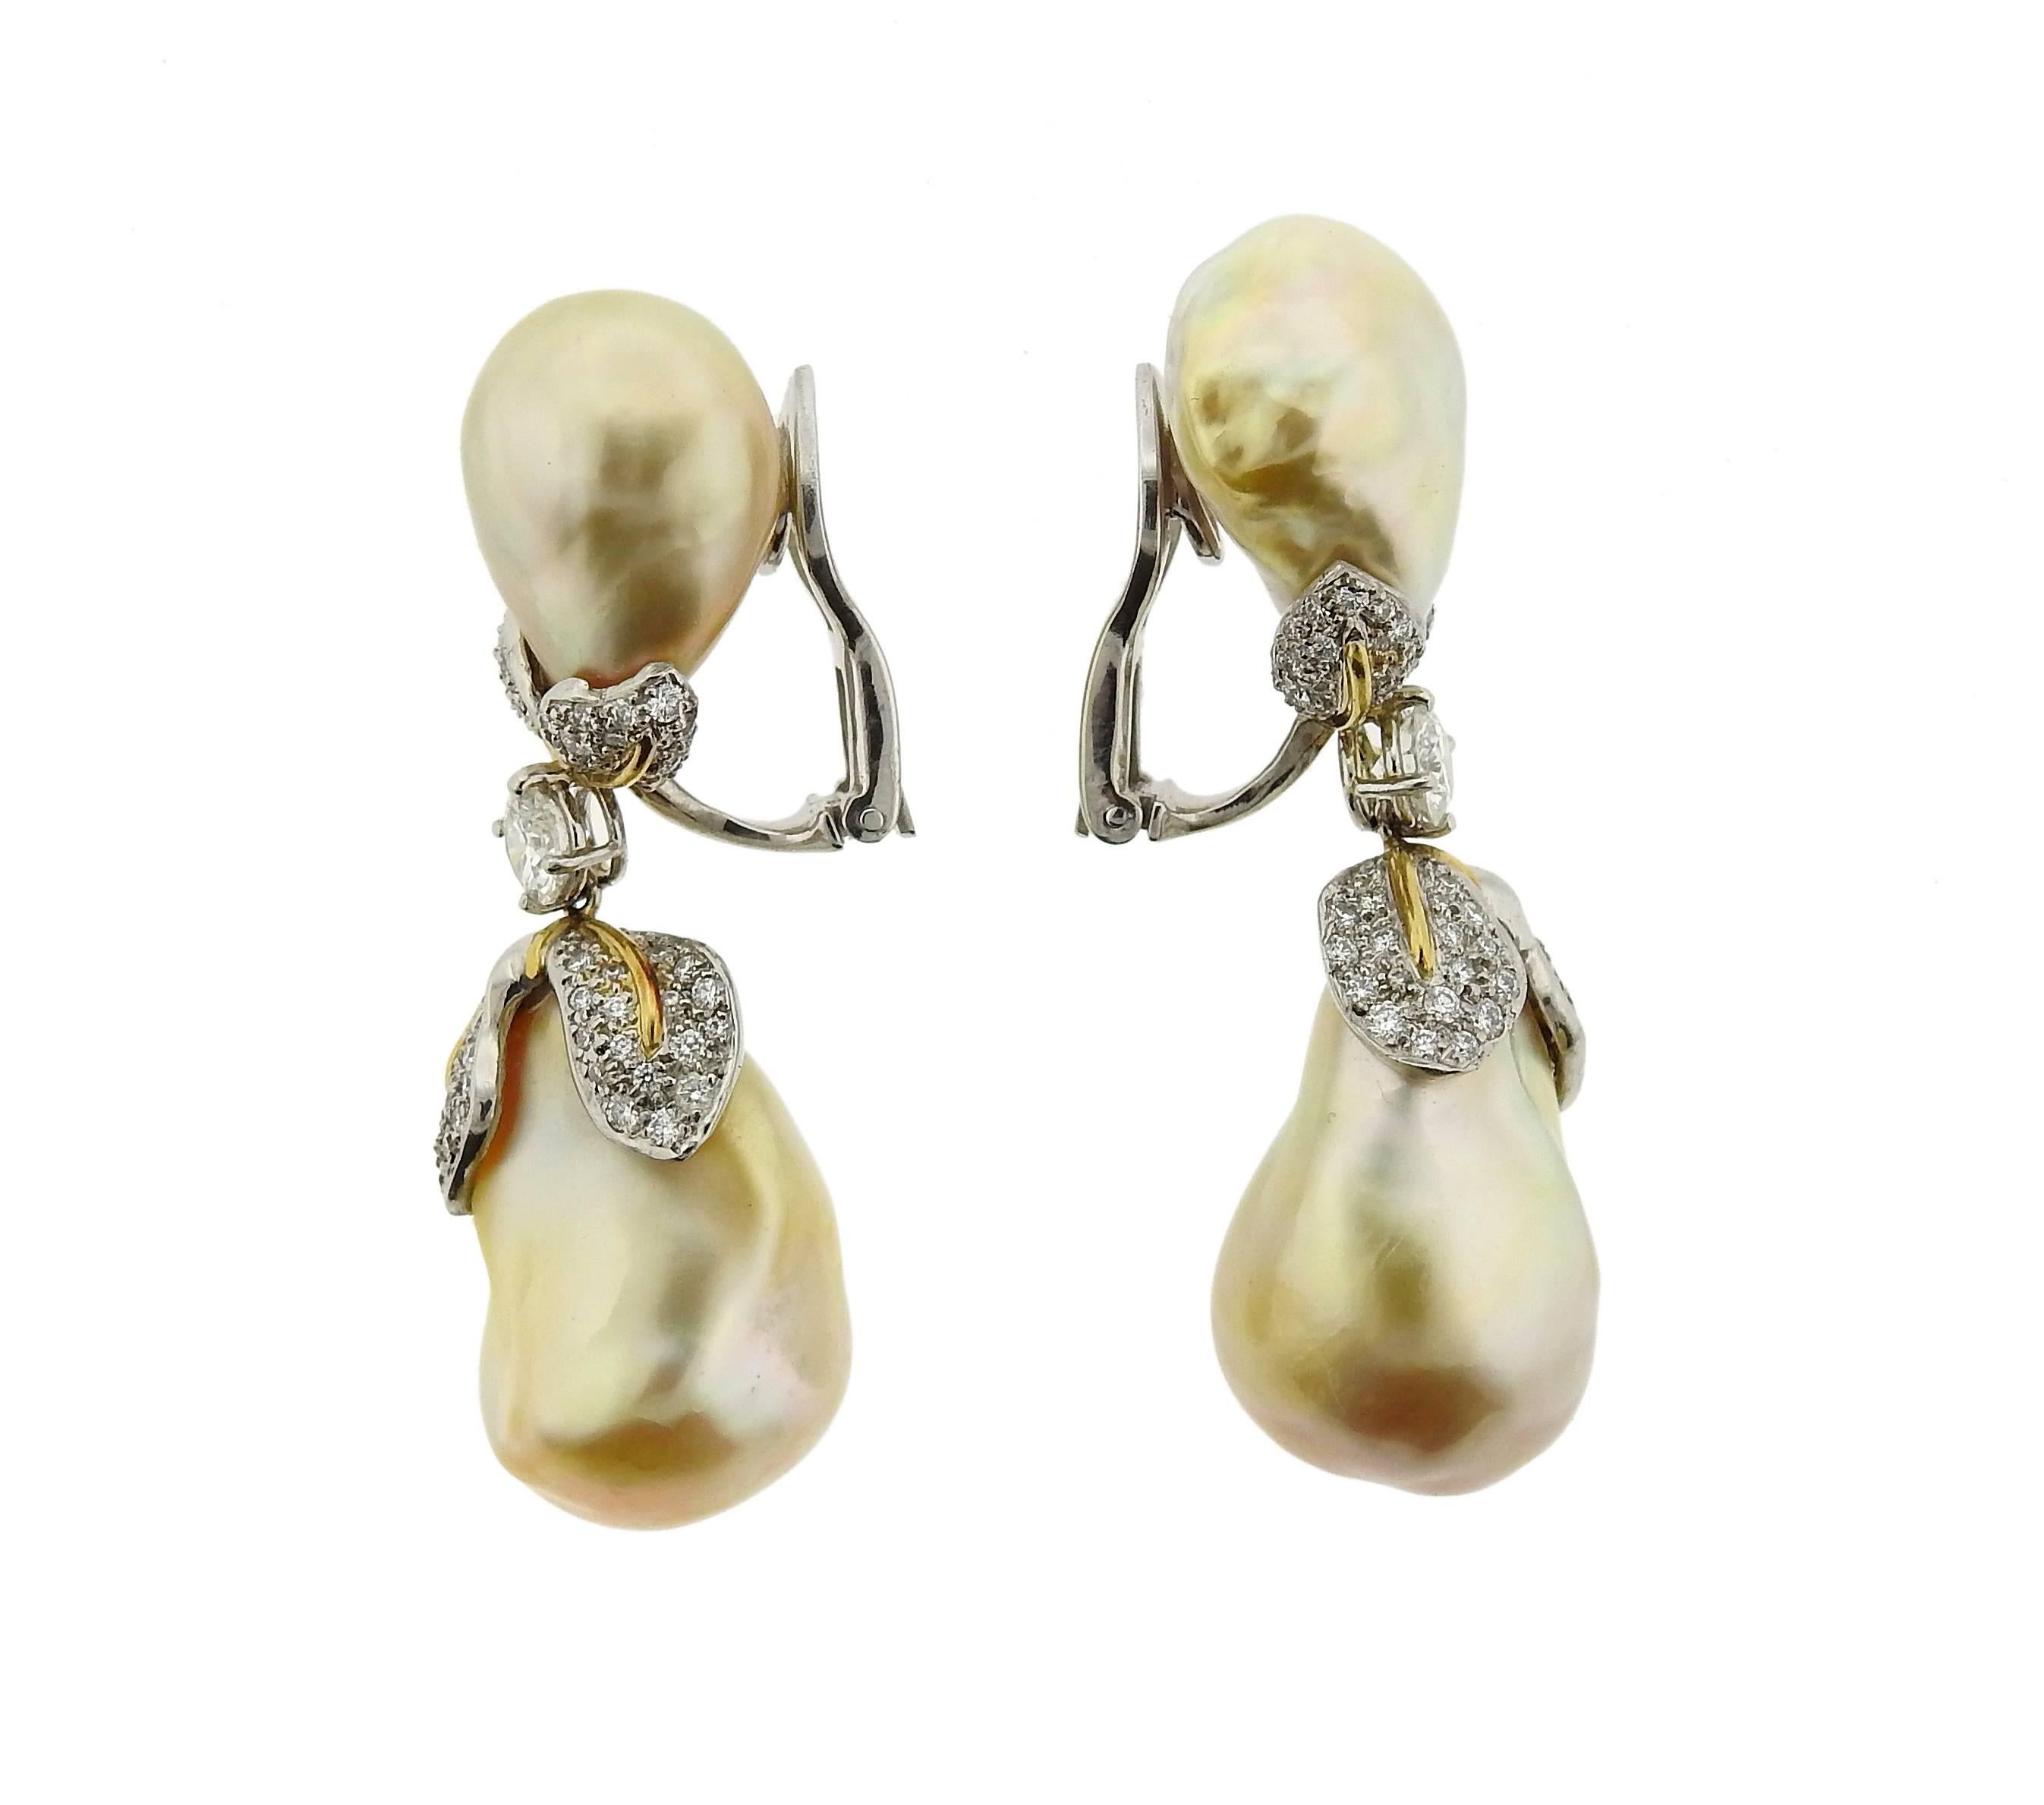 A pair of pearl and diamond earrings, crafted by Donna Vock in platinum with 18k gold accents. Earrings feature white and golden Baroque pearls, surrounded with approximately 2.00ctw in G/VS diamonds. Earrings measure 50mm x 17mm. Marked: Vock,